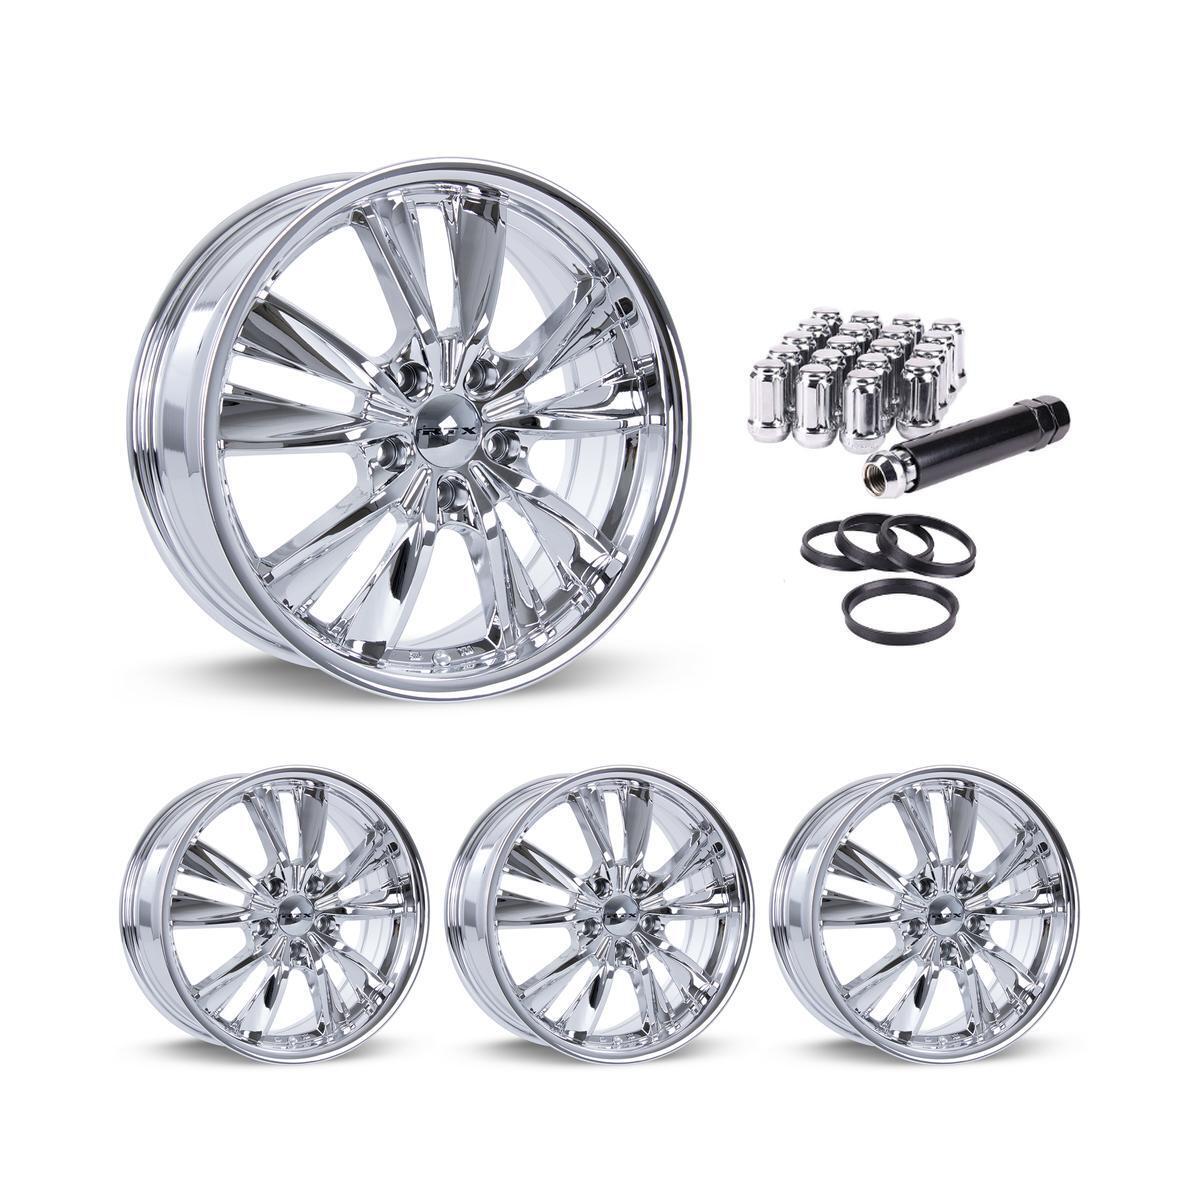 Wheel Rims Set with Chrome Lug Nuts Kit for 93-97 Ford Probe P820501 17 inch